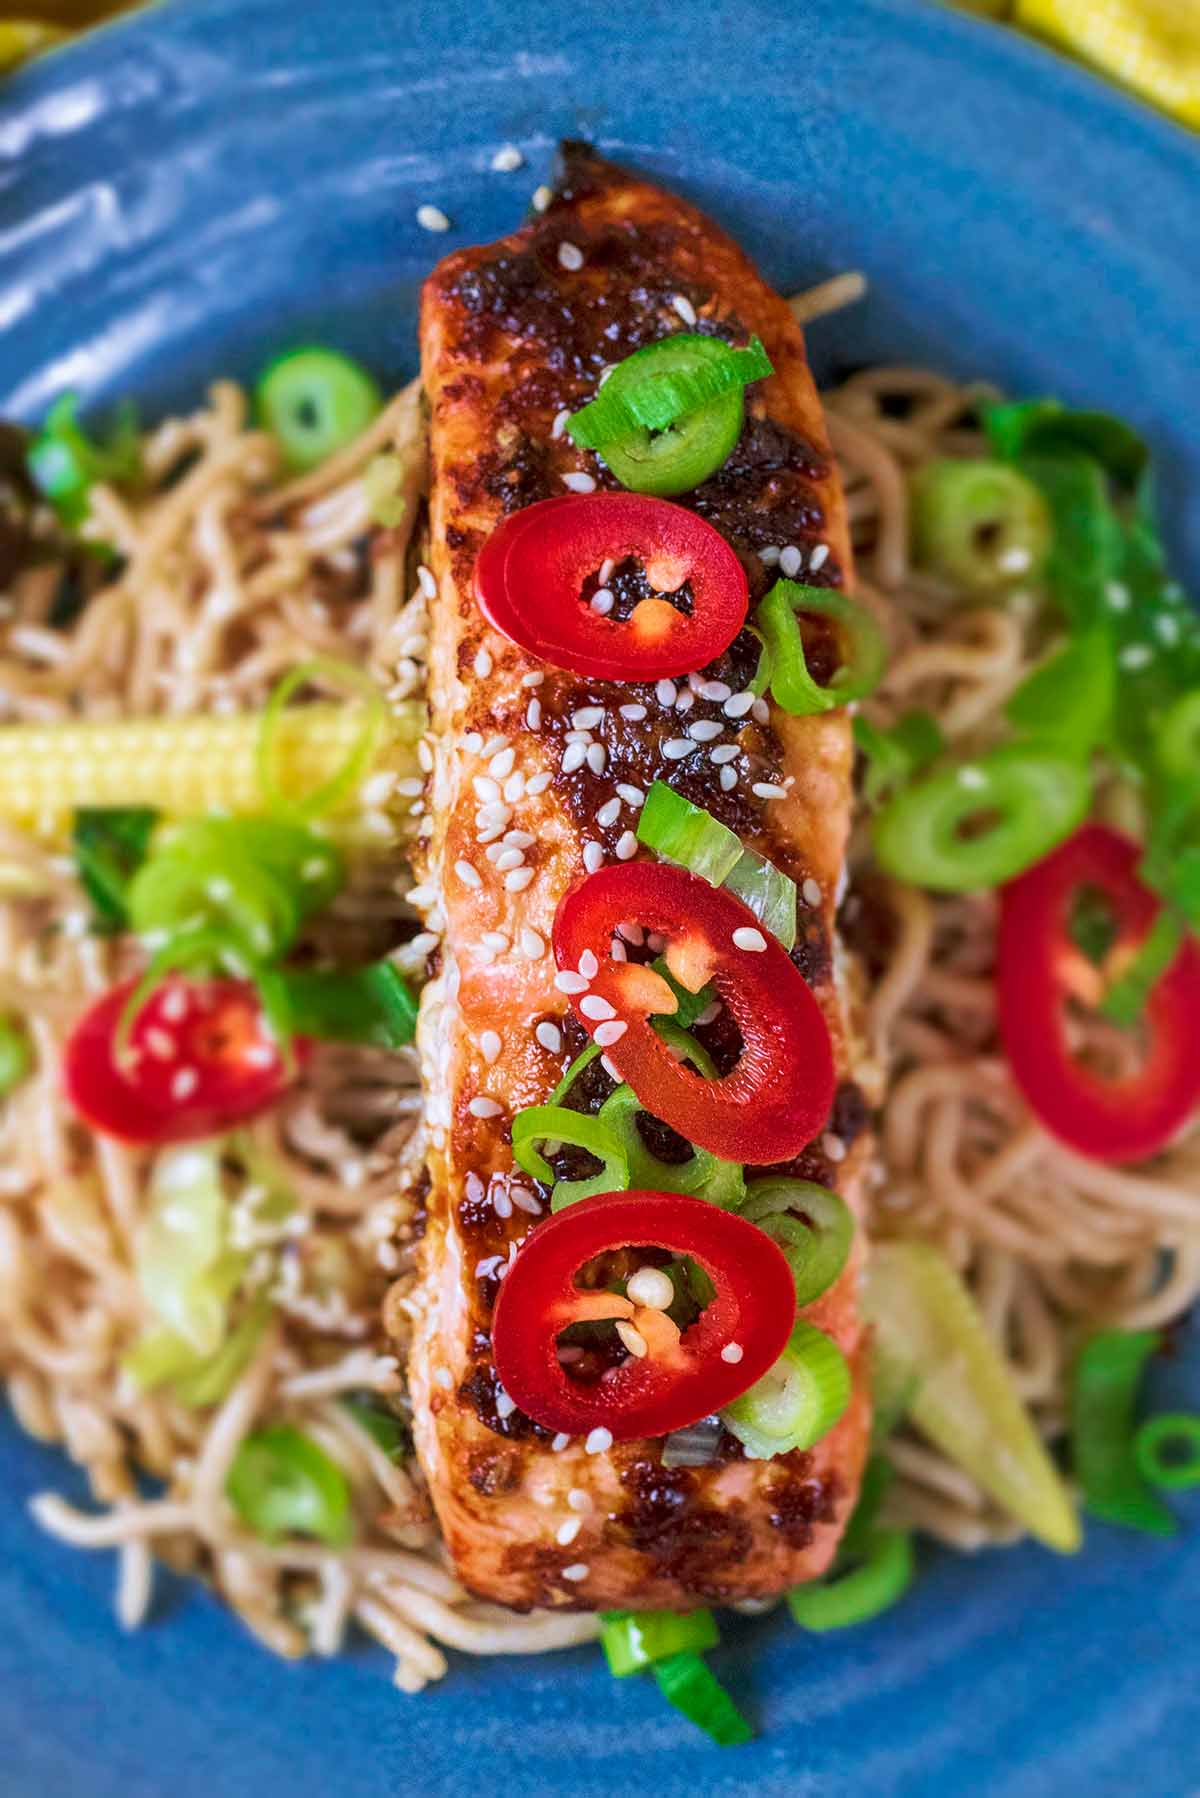 Cooked salmon fillet topped with sliced red chilli and sesame seeds.